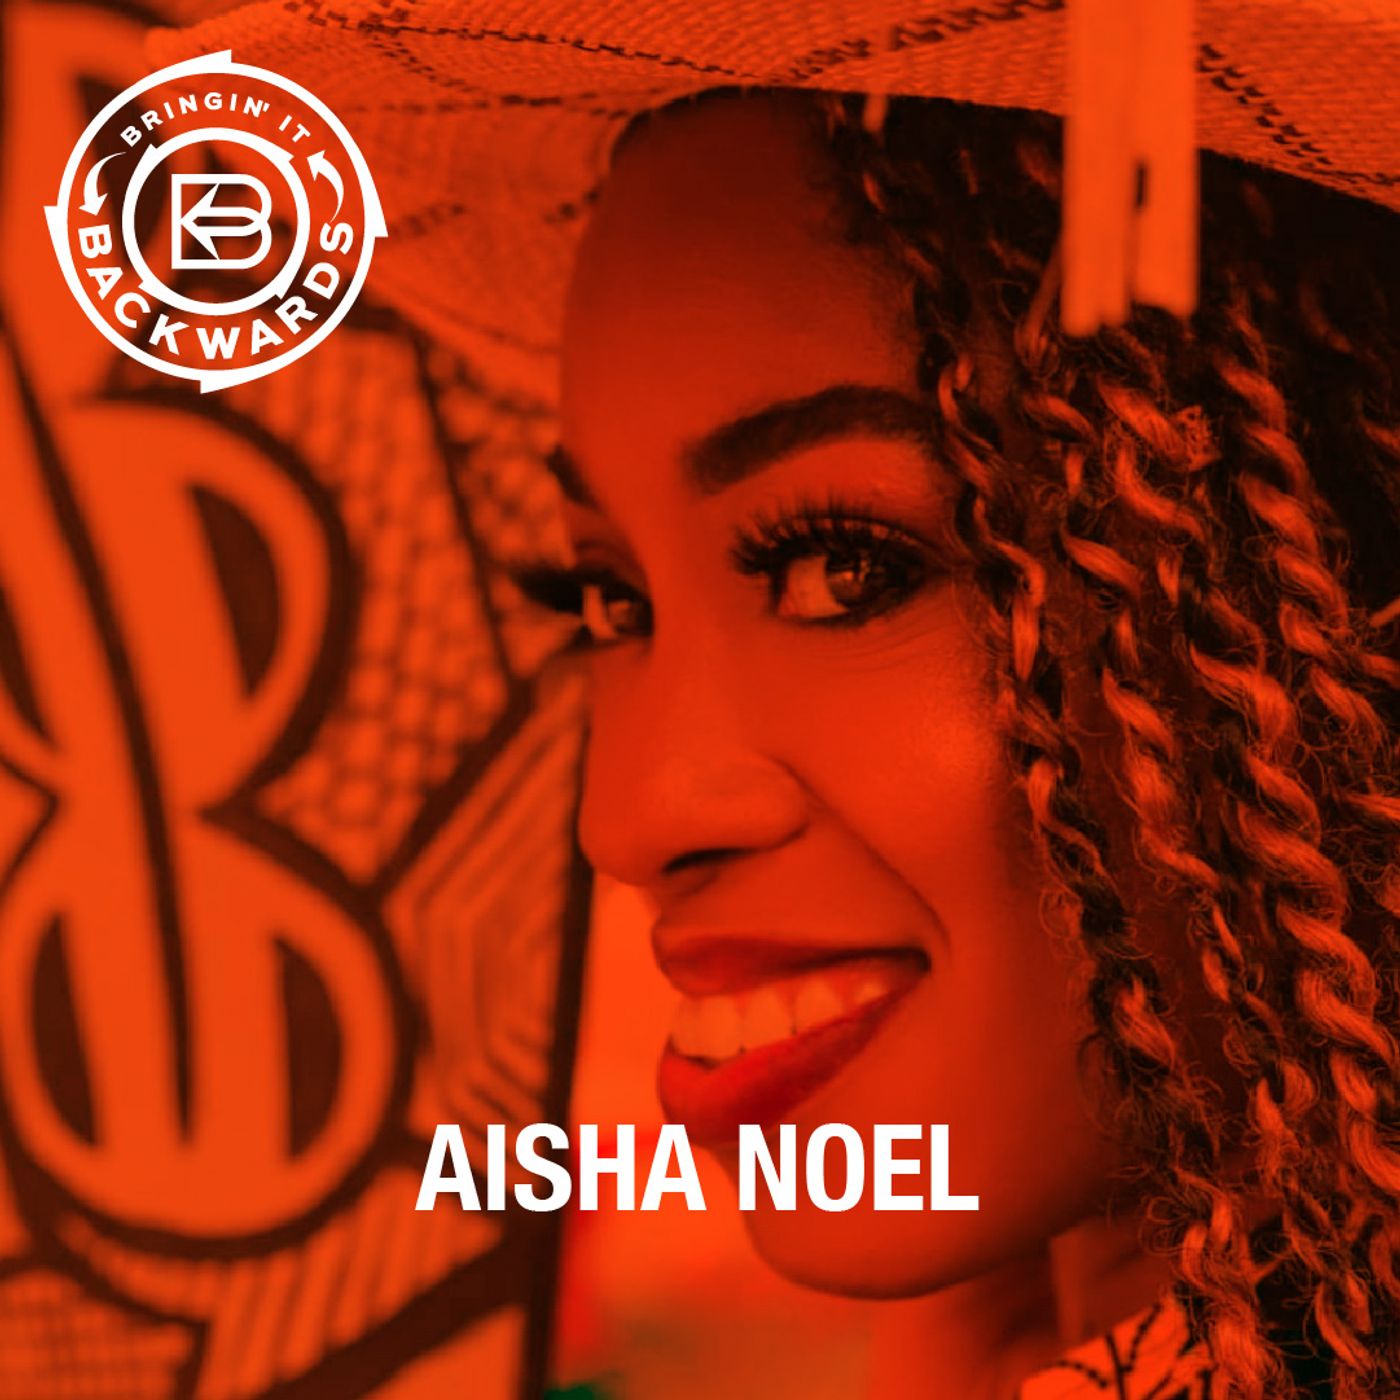 Interview with Aisha Noel Image